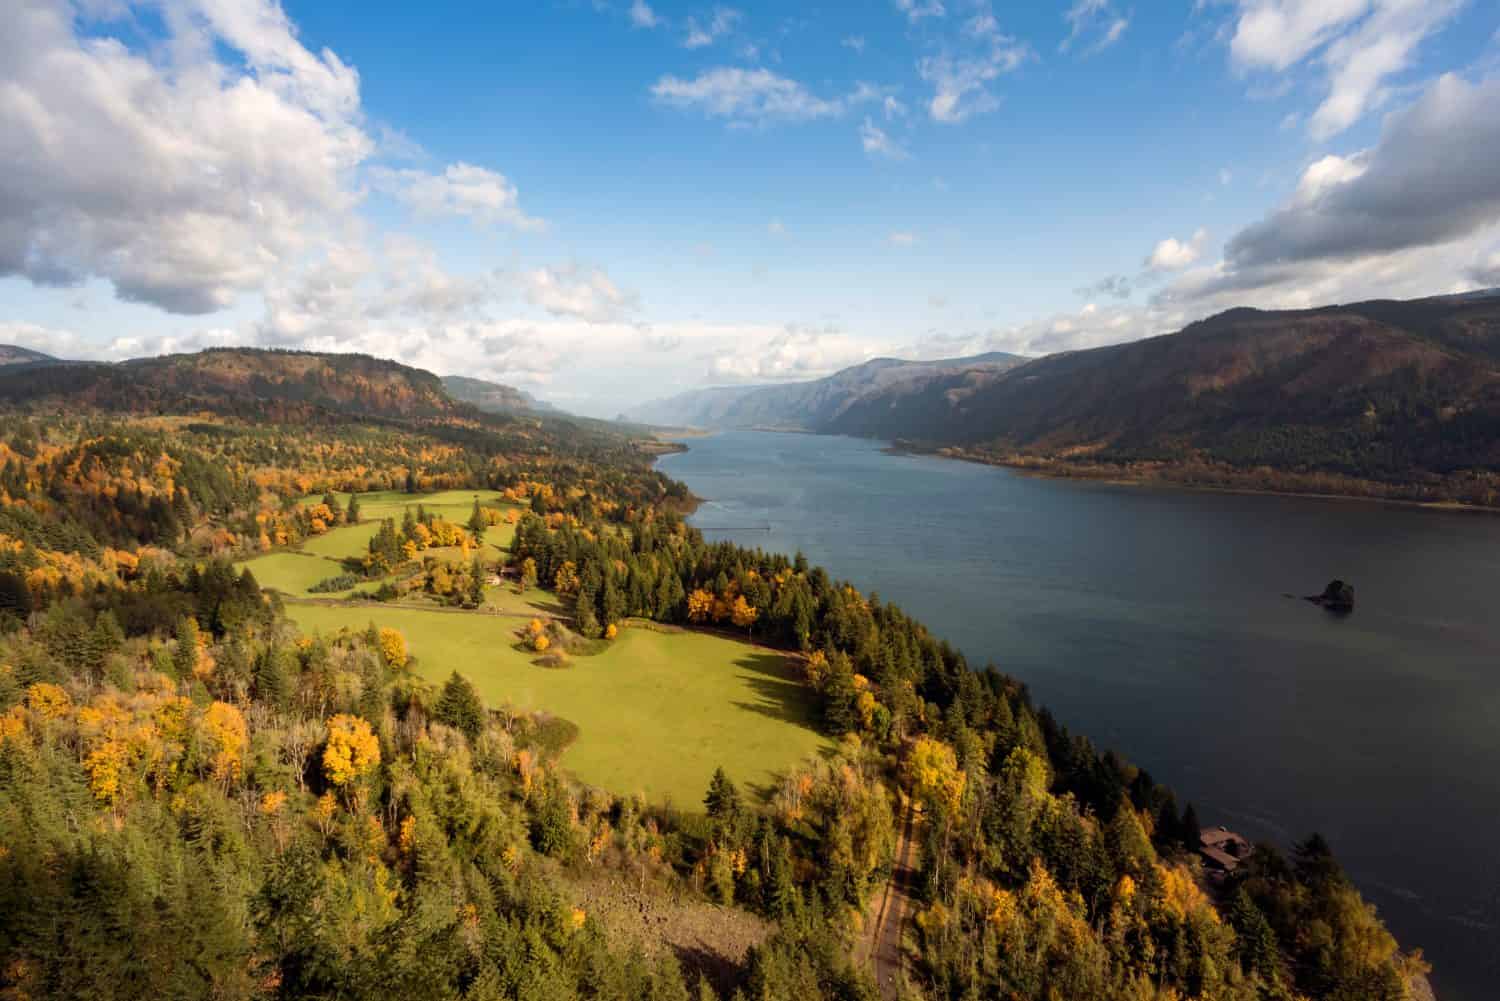 Autumn has arrived in the Columbia Gorge.  This was taken from the Cape Horn overlook near Washougal, Washington.  